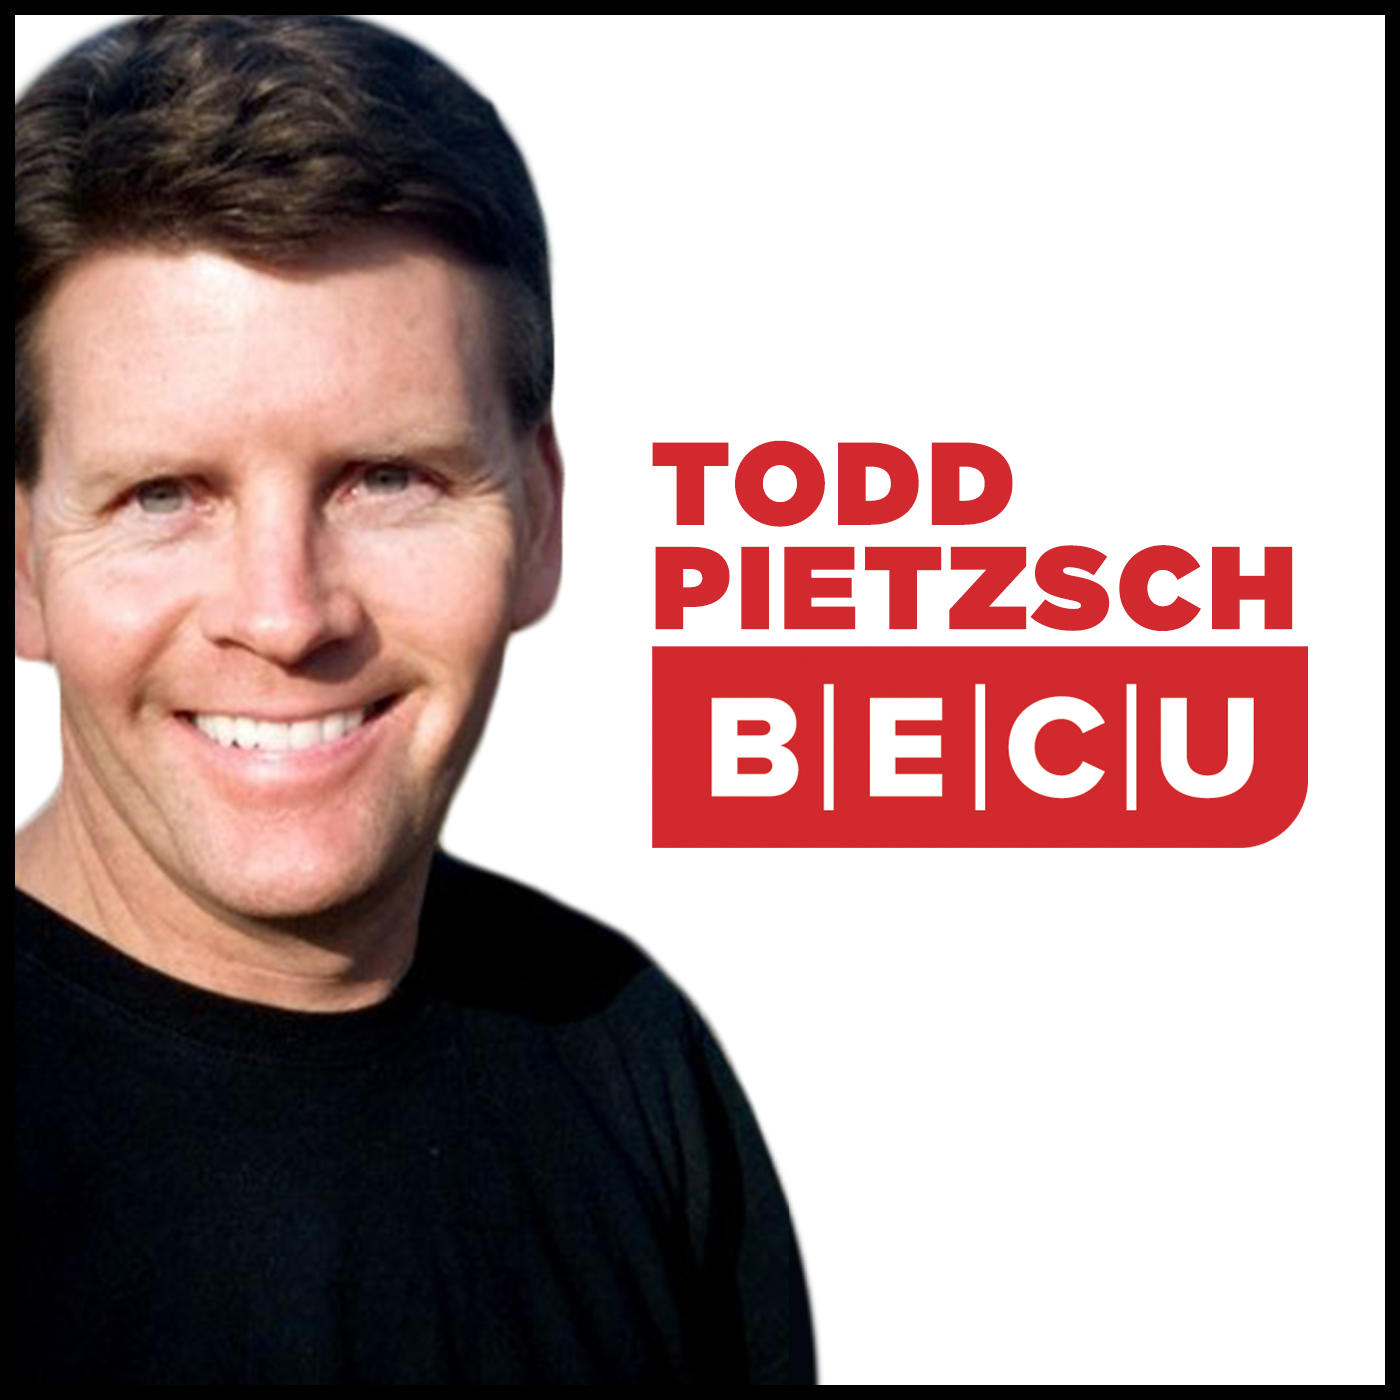 Todd Pietszch from BECU joins us!